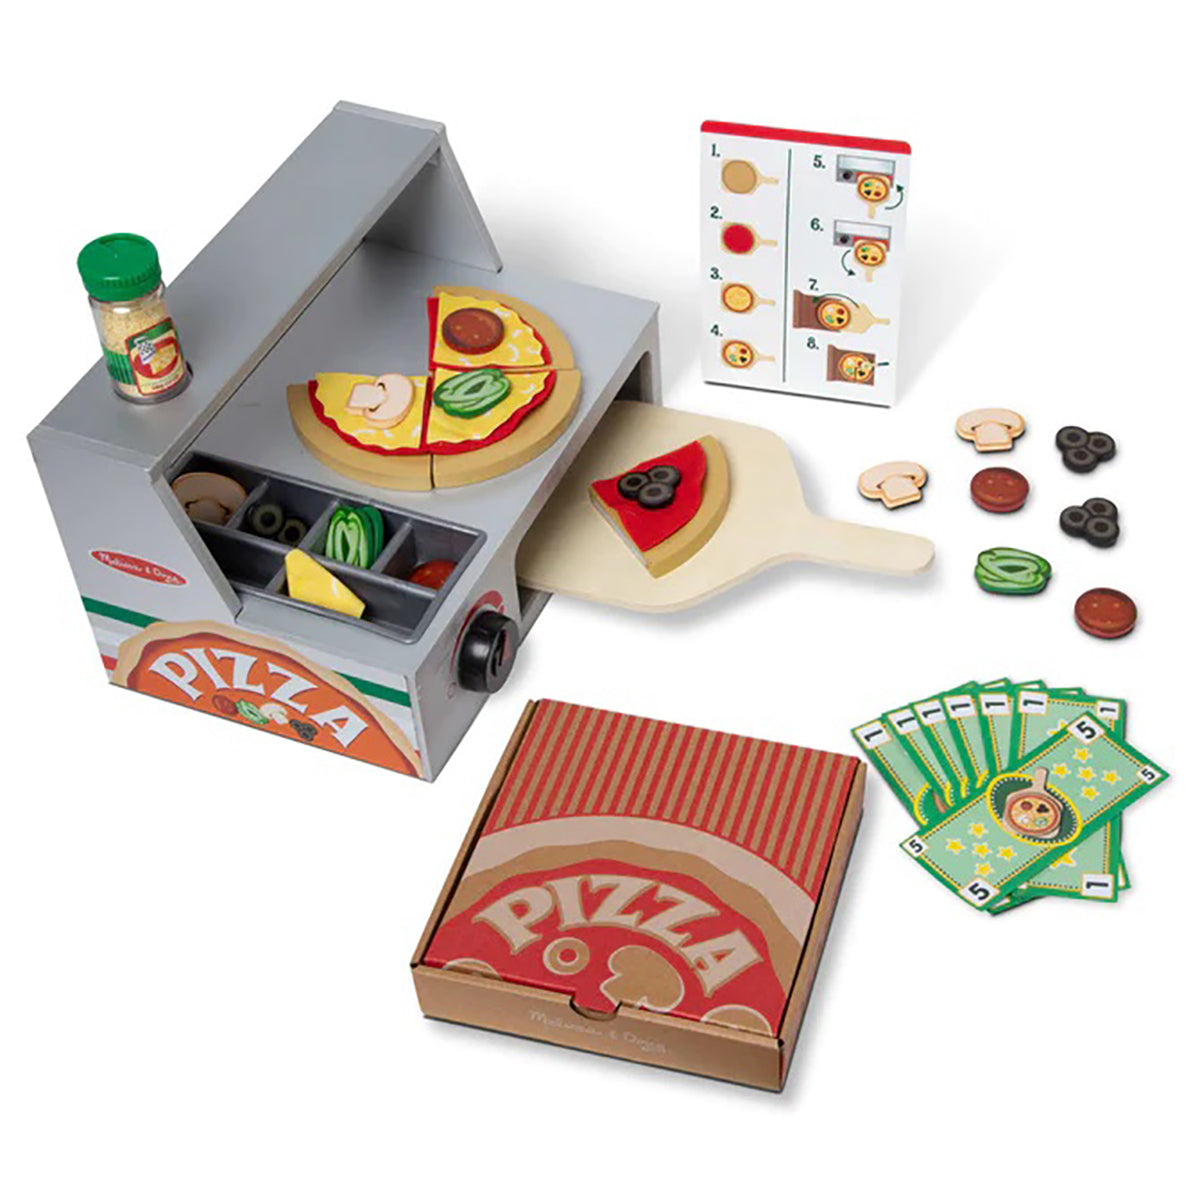 TOY CHEF PIZZA SHACK KIDS PLAY FOOD PIZZA MAKING 36 Pc TOY SET NEW IN BOX